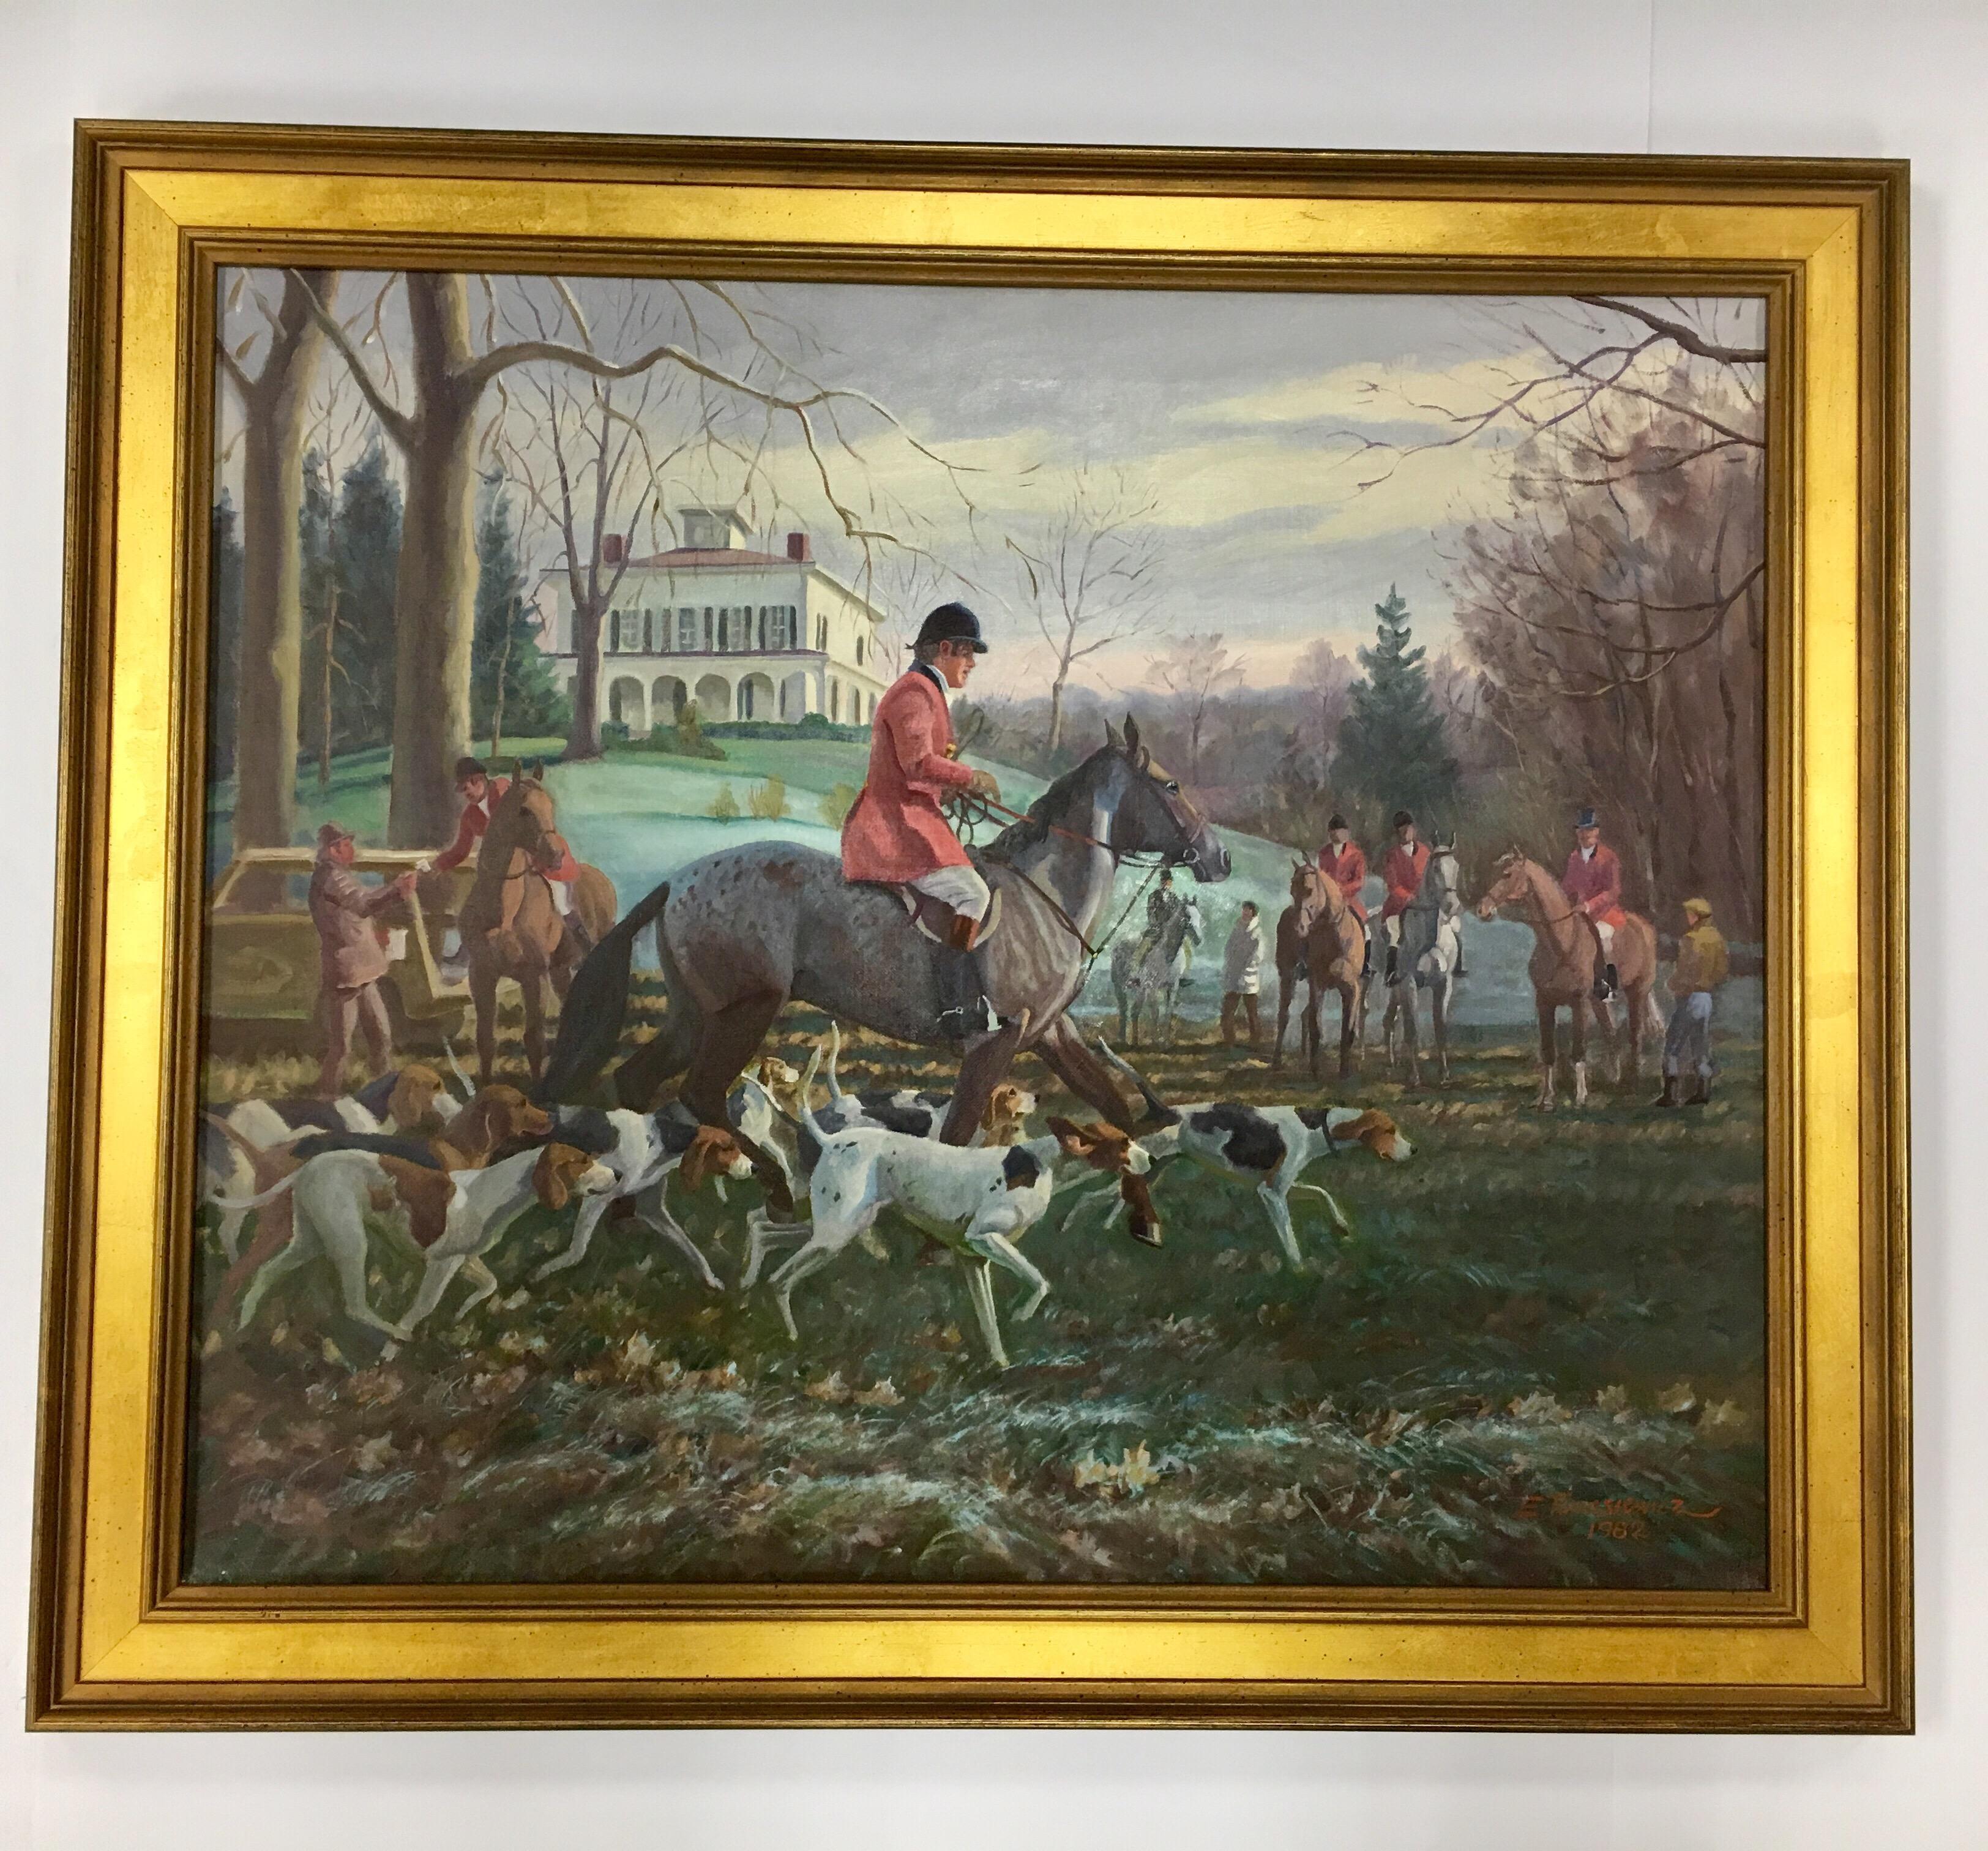 Stunning original Edward Tomasiewicz (1919-2006) oil painting depicting a hunt scene in the countryside. His work is featured in and around the northeast part of the United States. Medium is oil on canvas and frame is original.